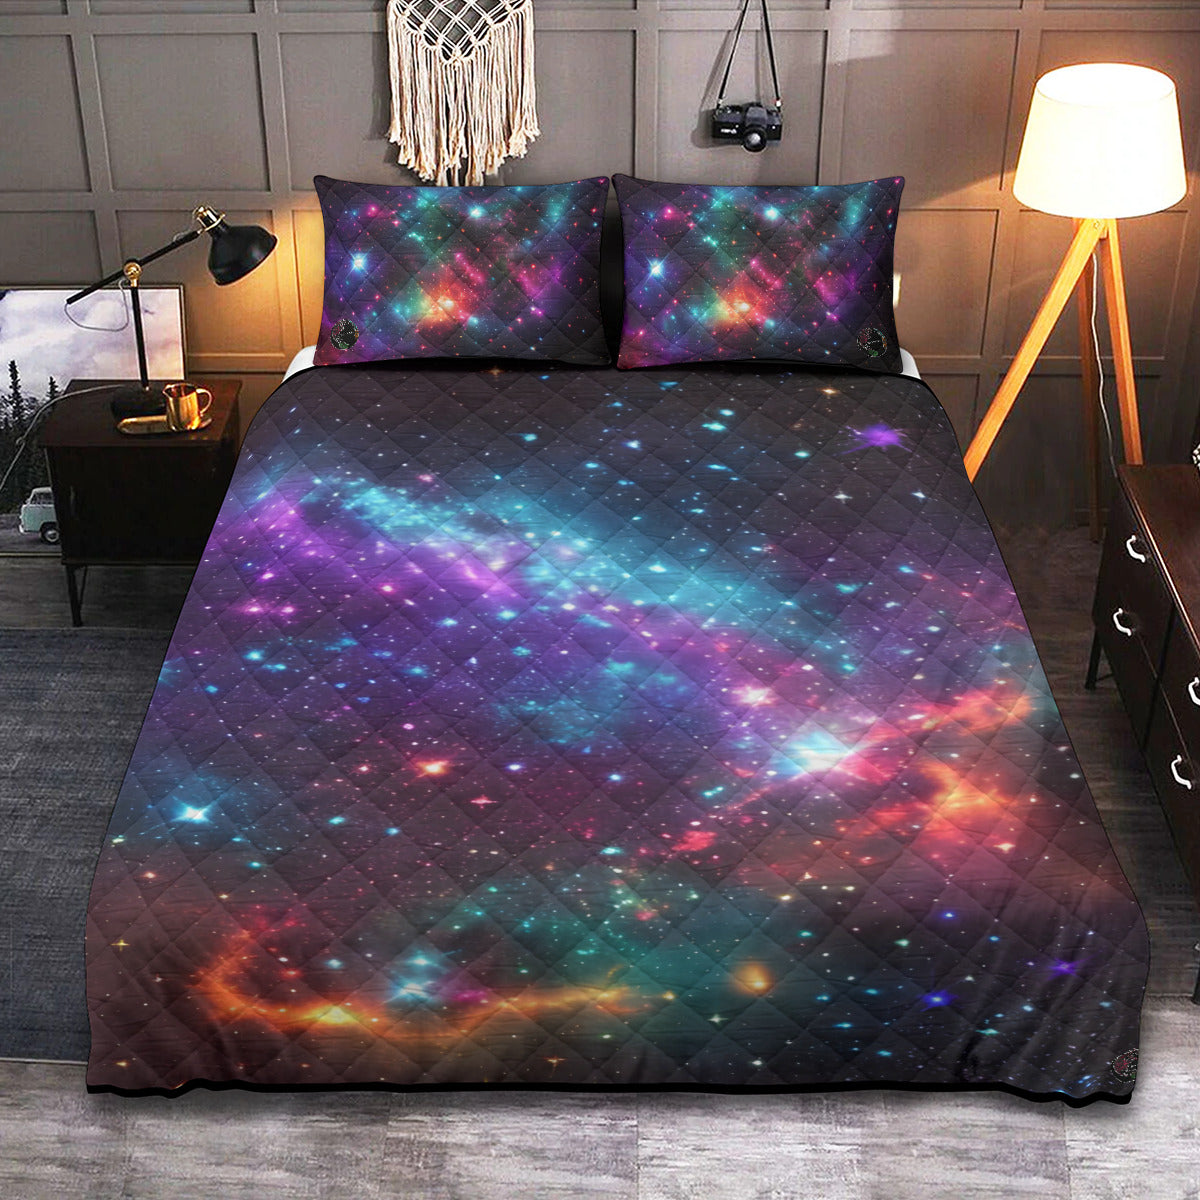 Soulful Sleep: Dreamcatcher - Quilt and Pillow Cases Bedding Set The Nebula Palace: Spiritually Cosmic Fashion